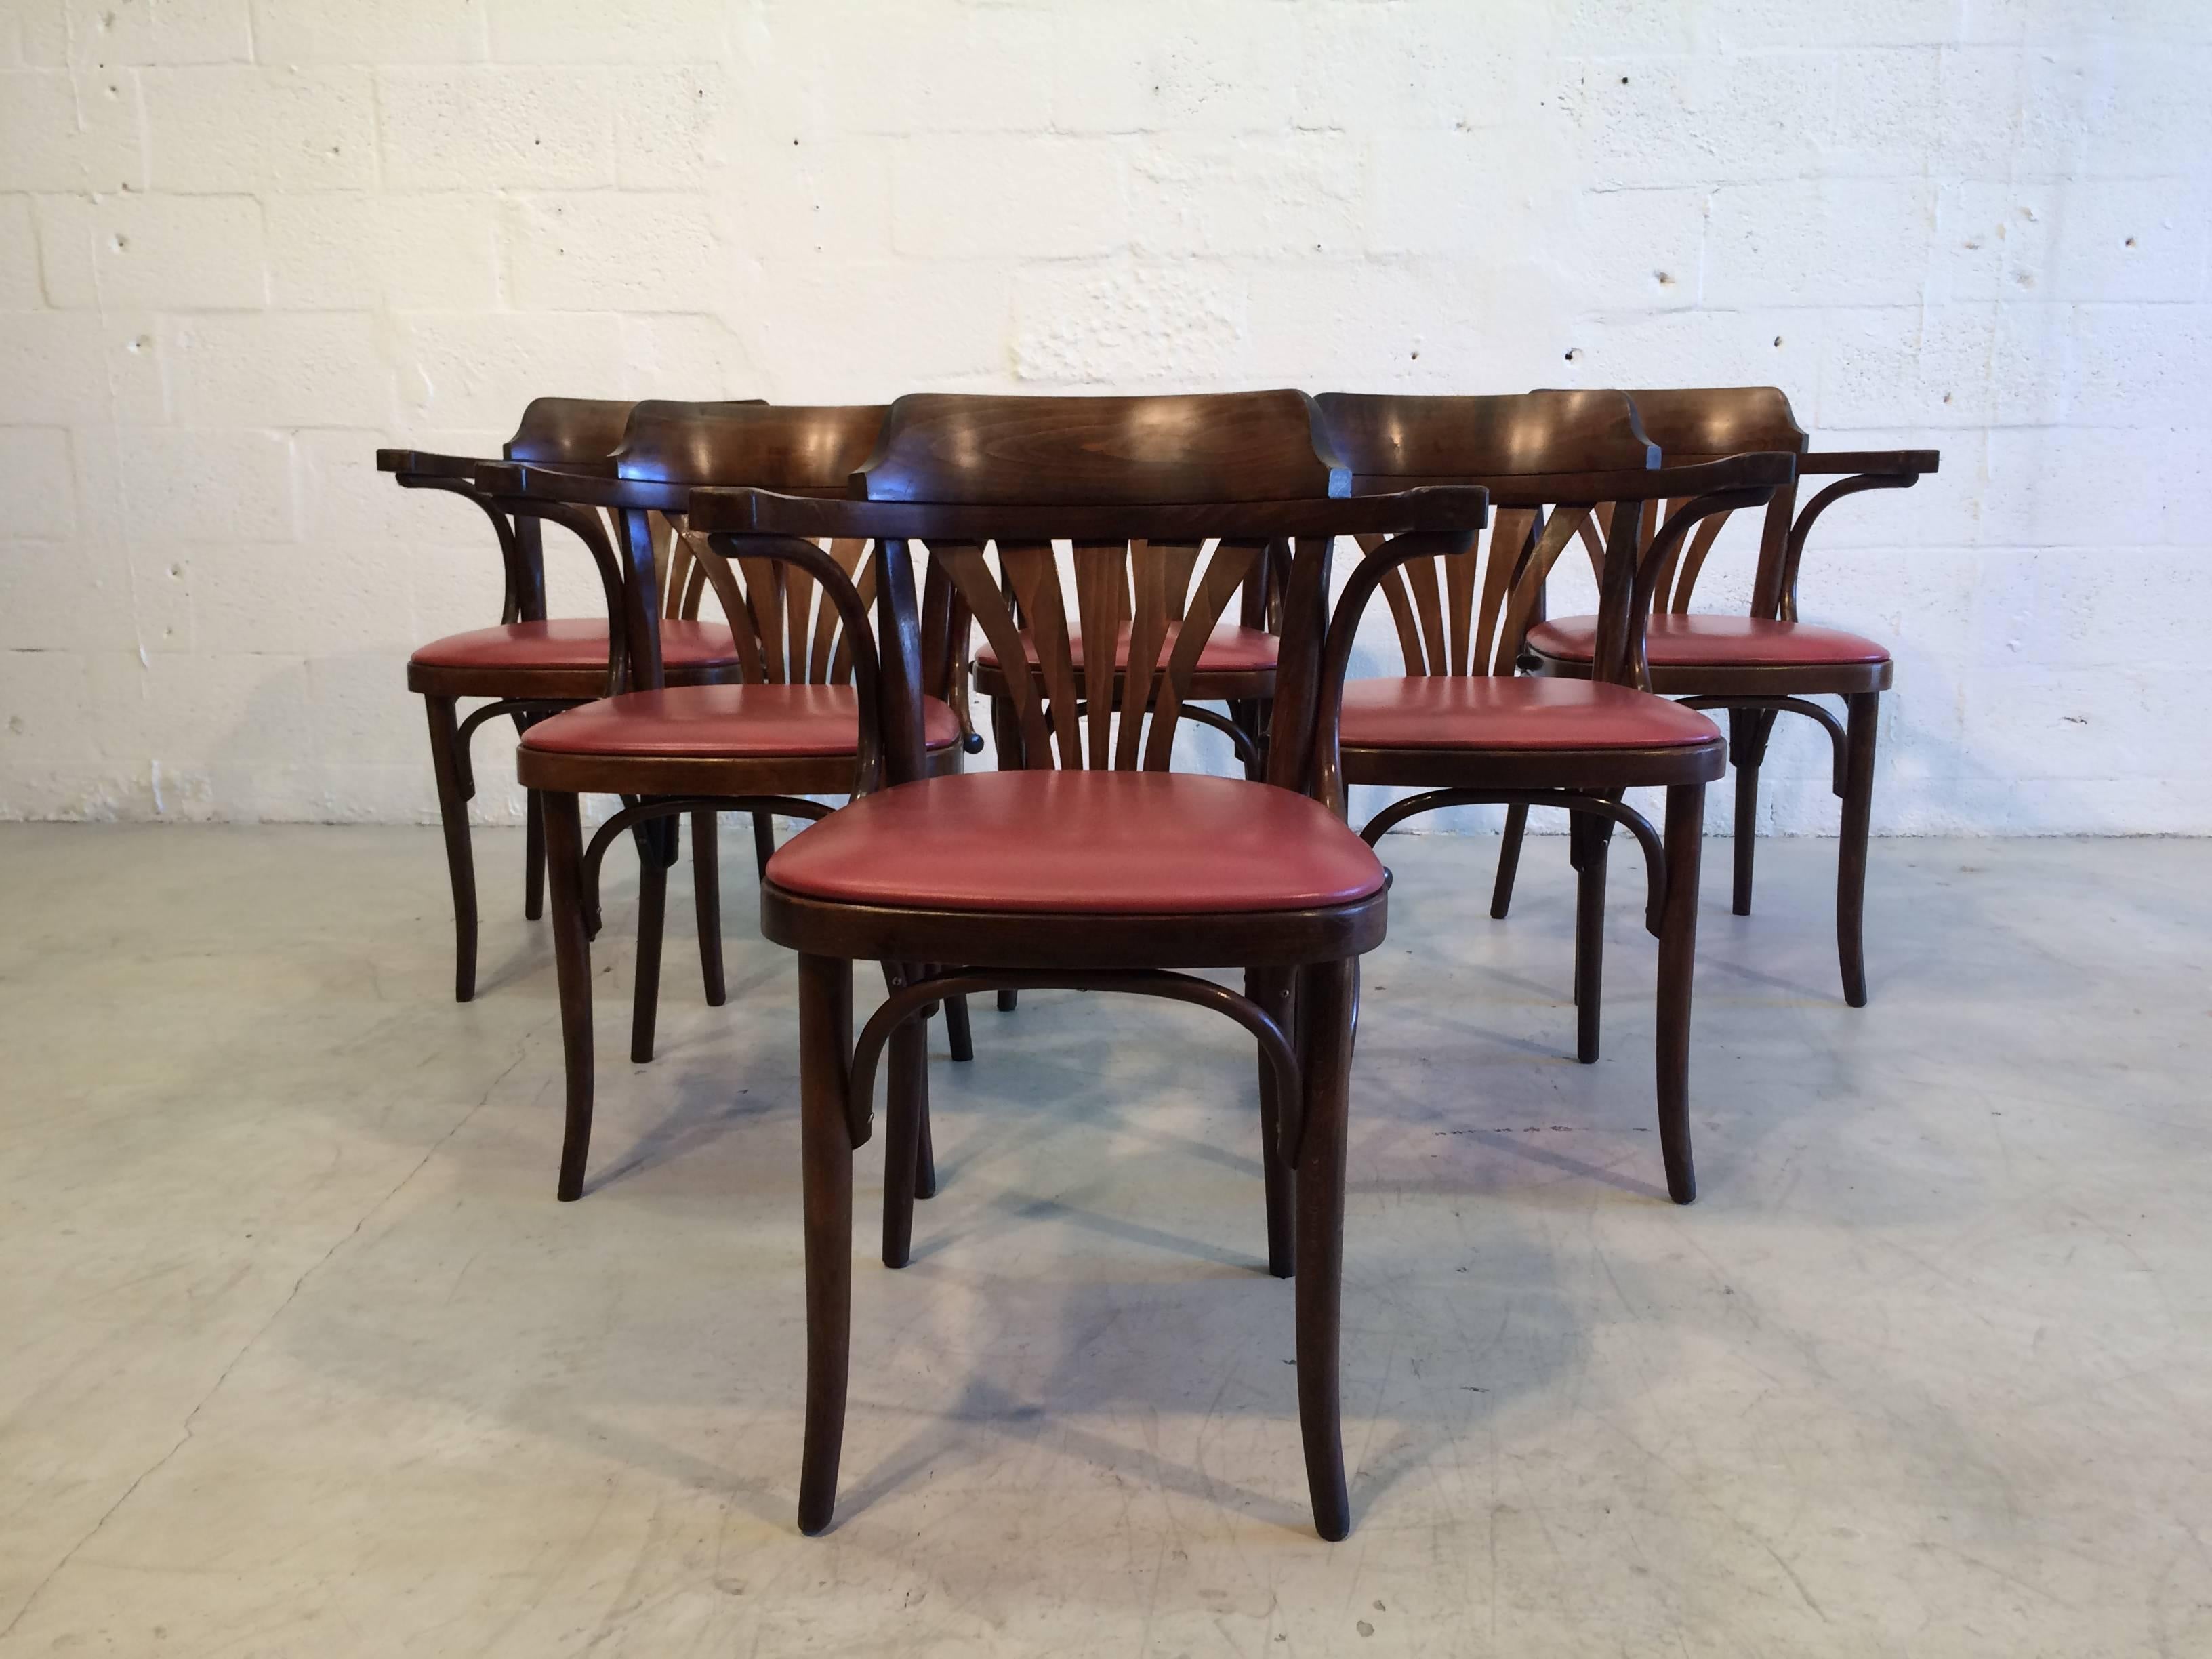 Great and timeless chairs, 12 chairs in total available.